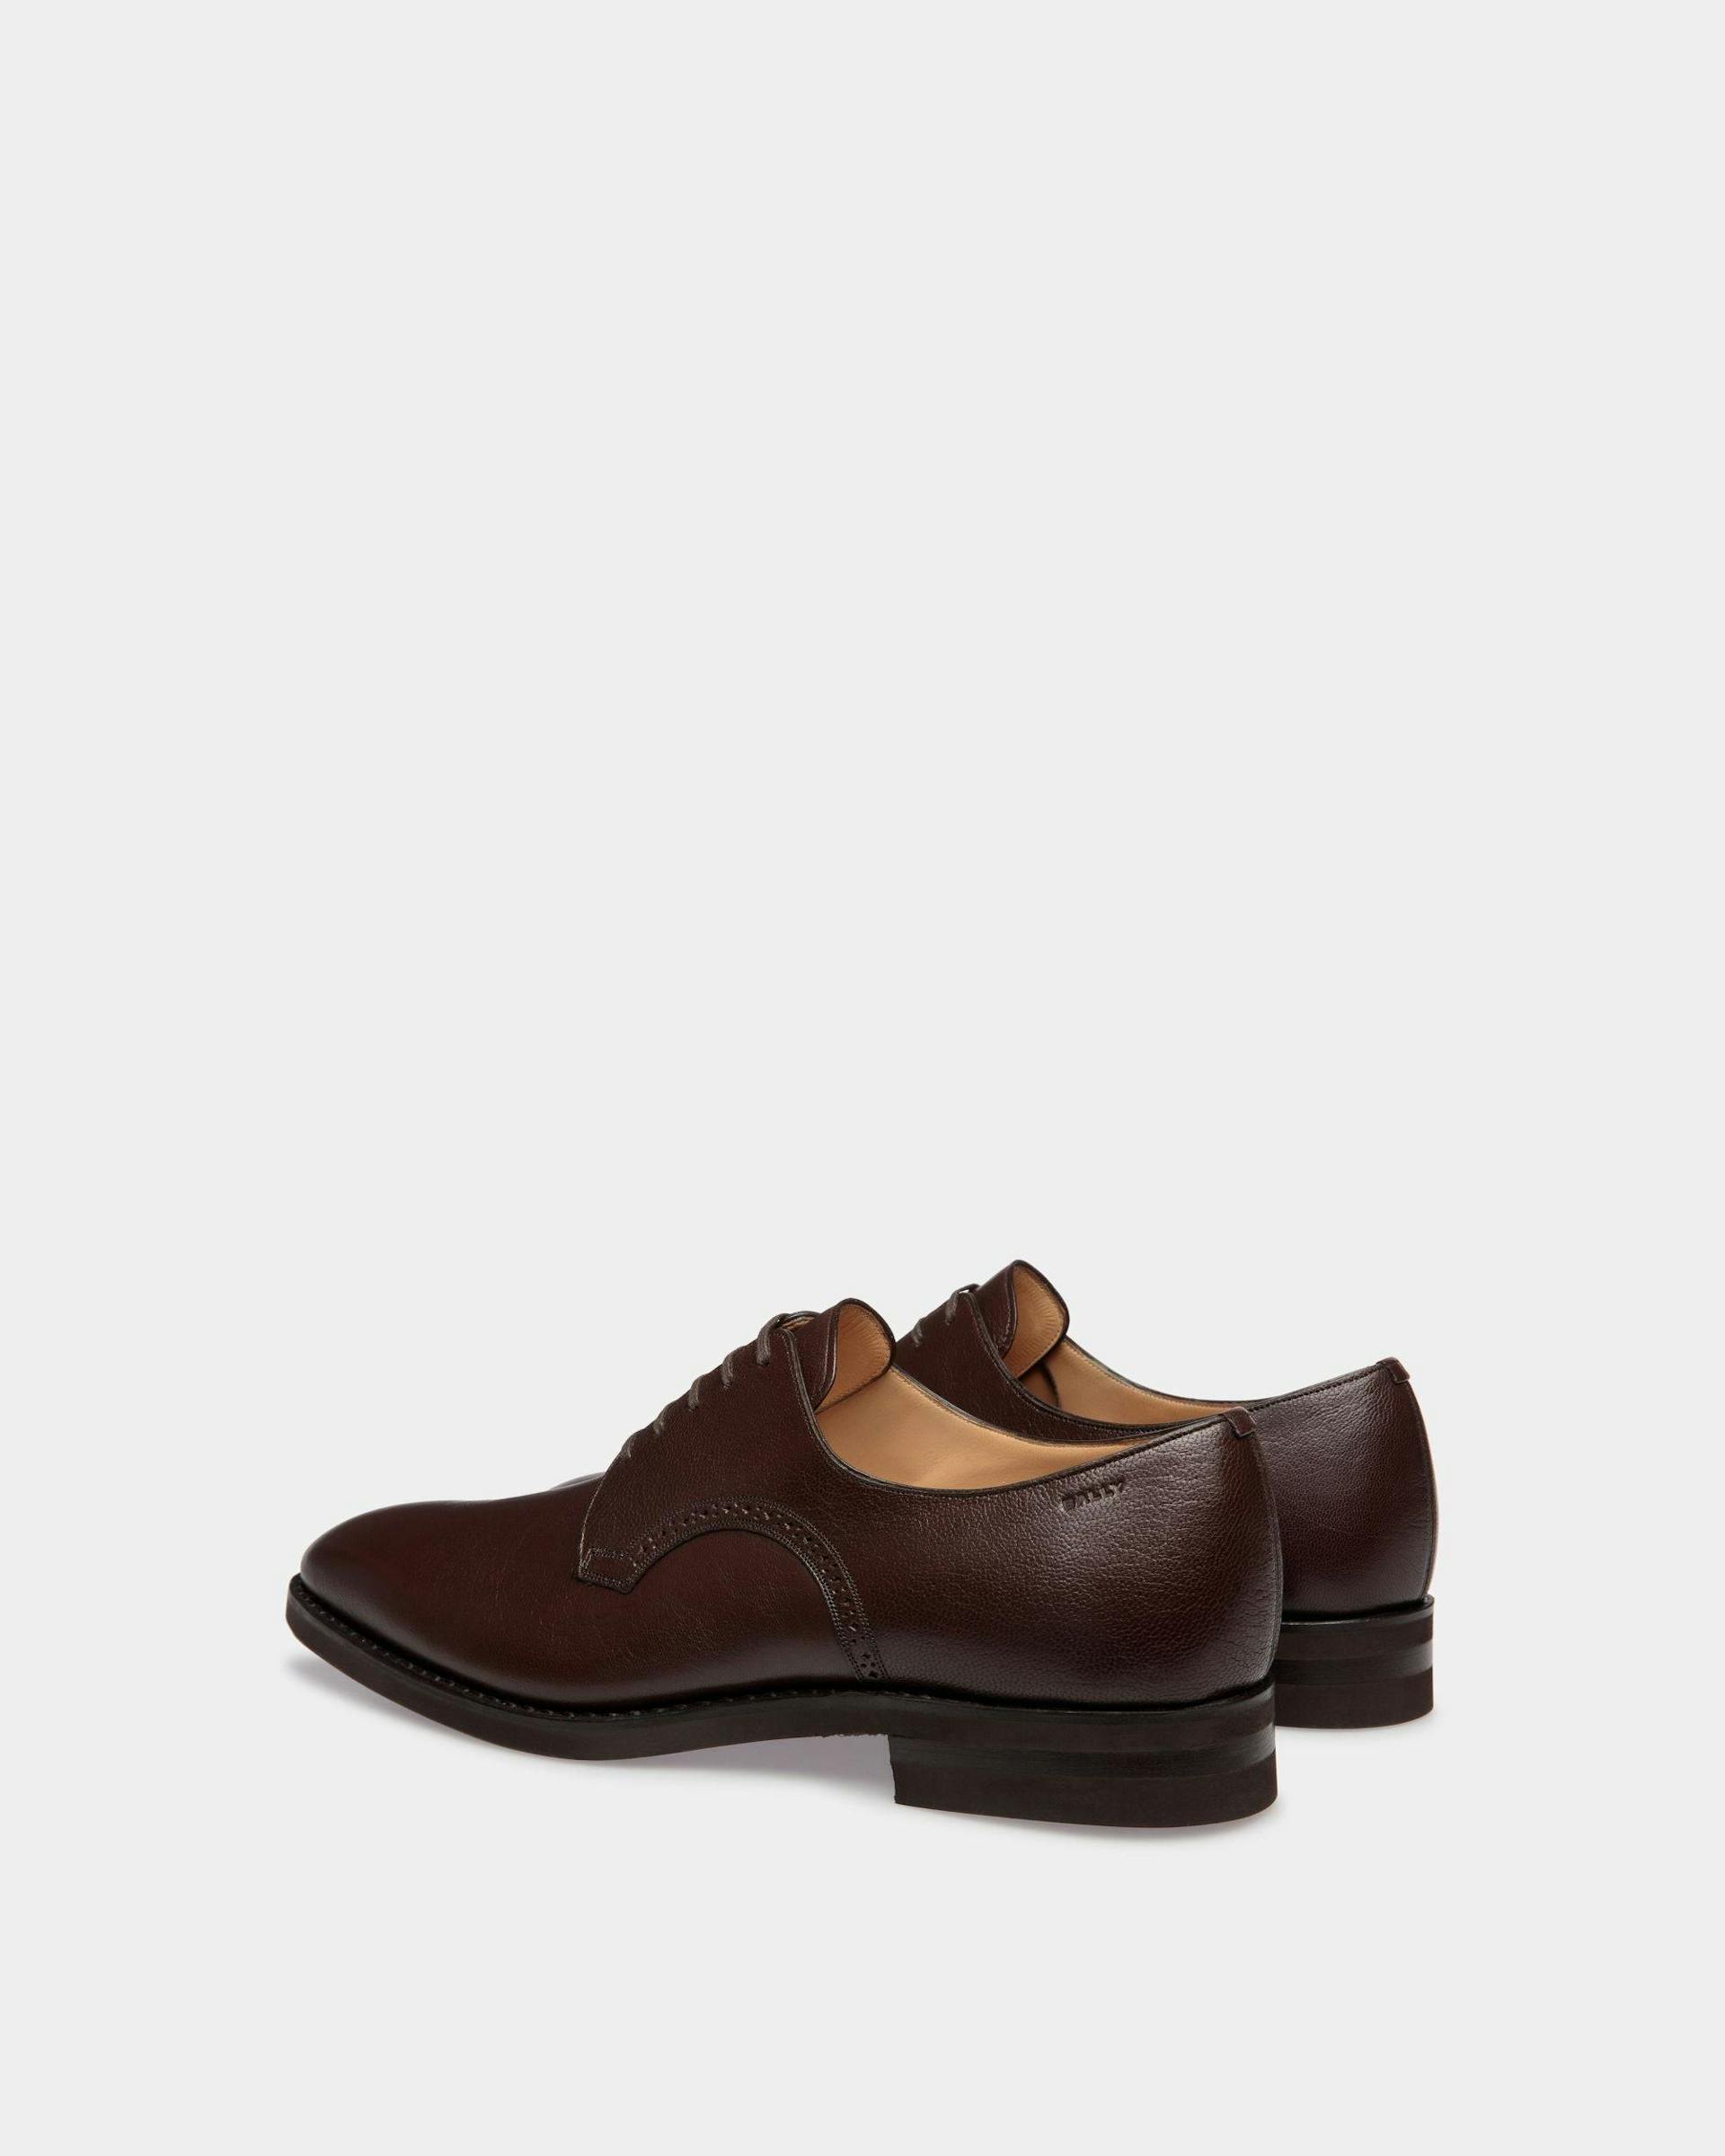 Men's Scribe Derby in Brown Grained Leather | Bally | Still Life 3/4 Front